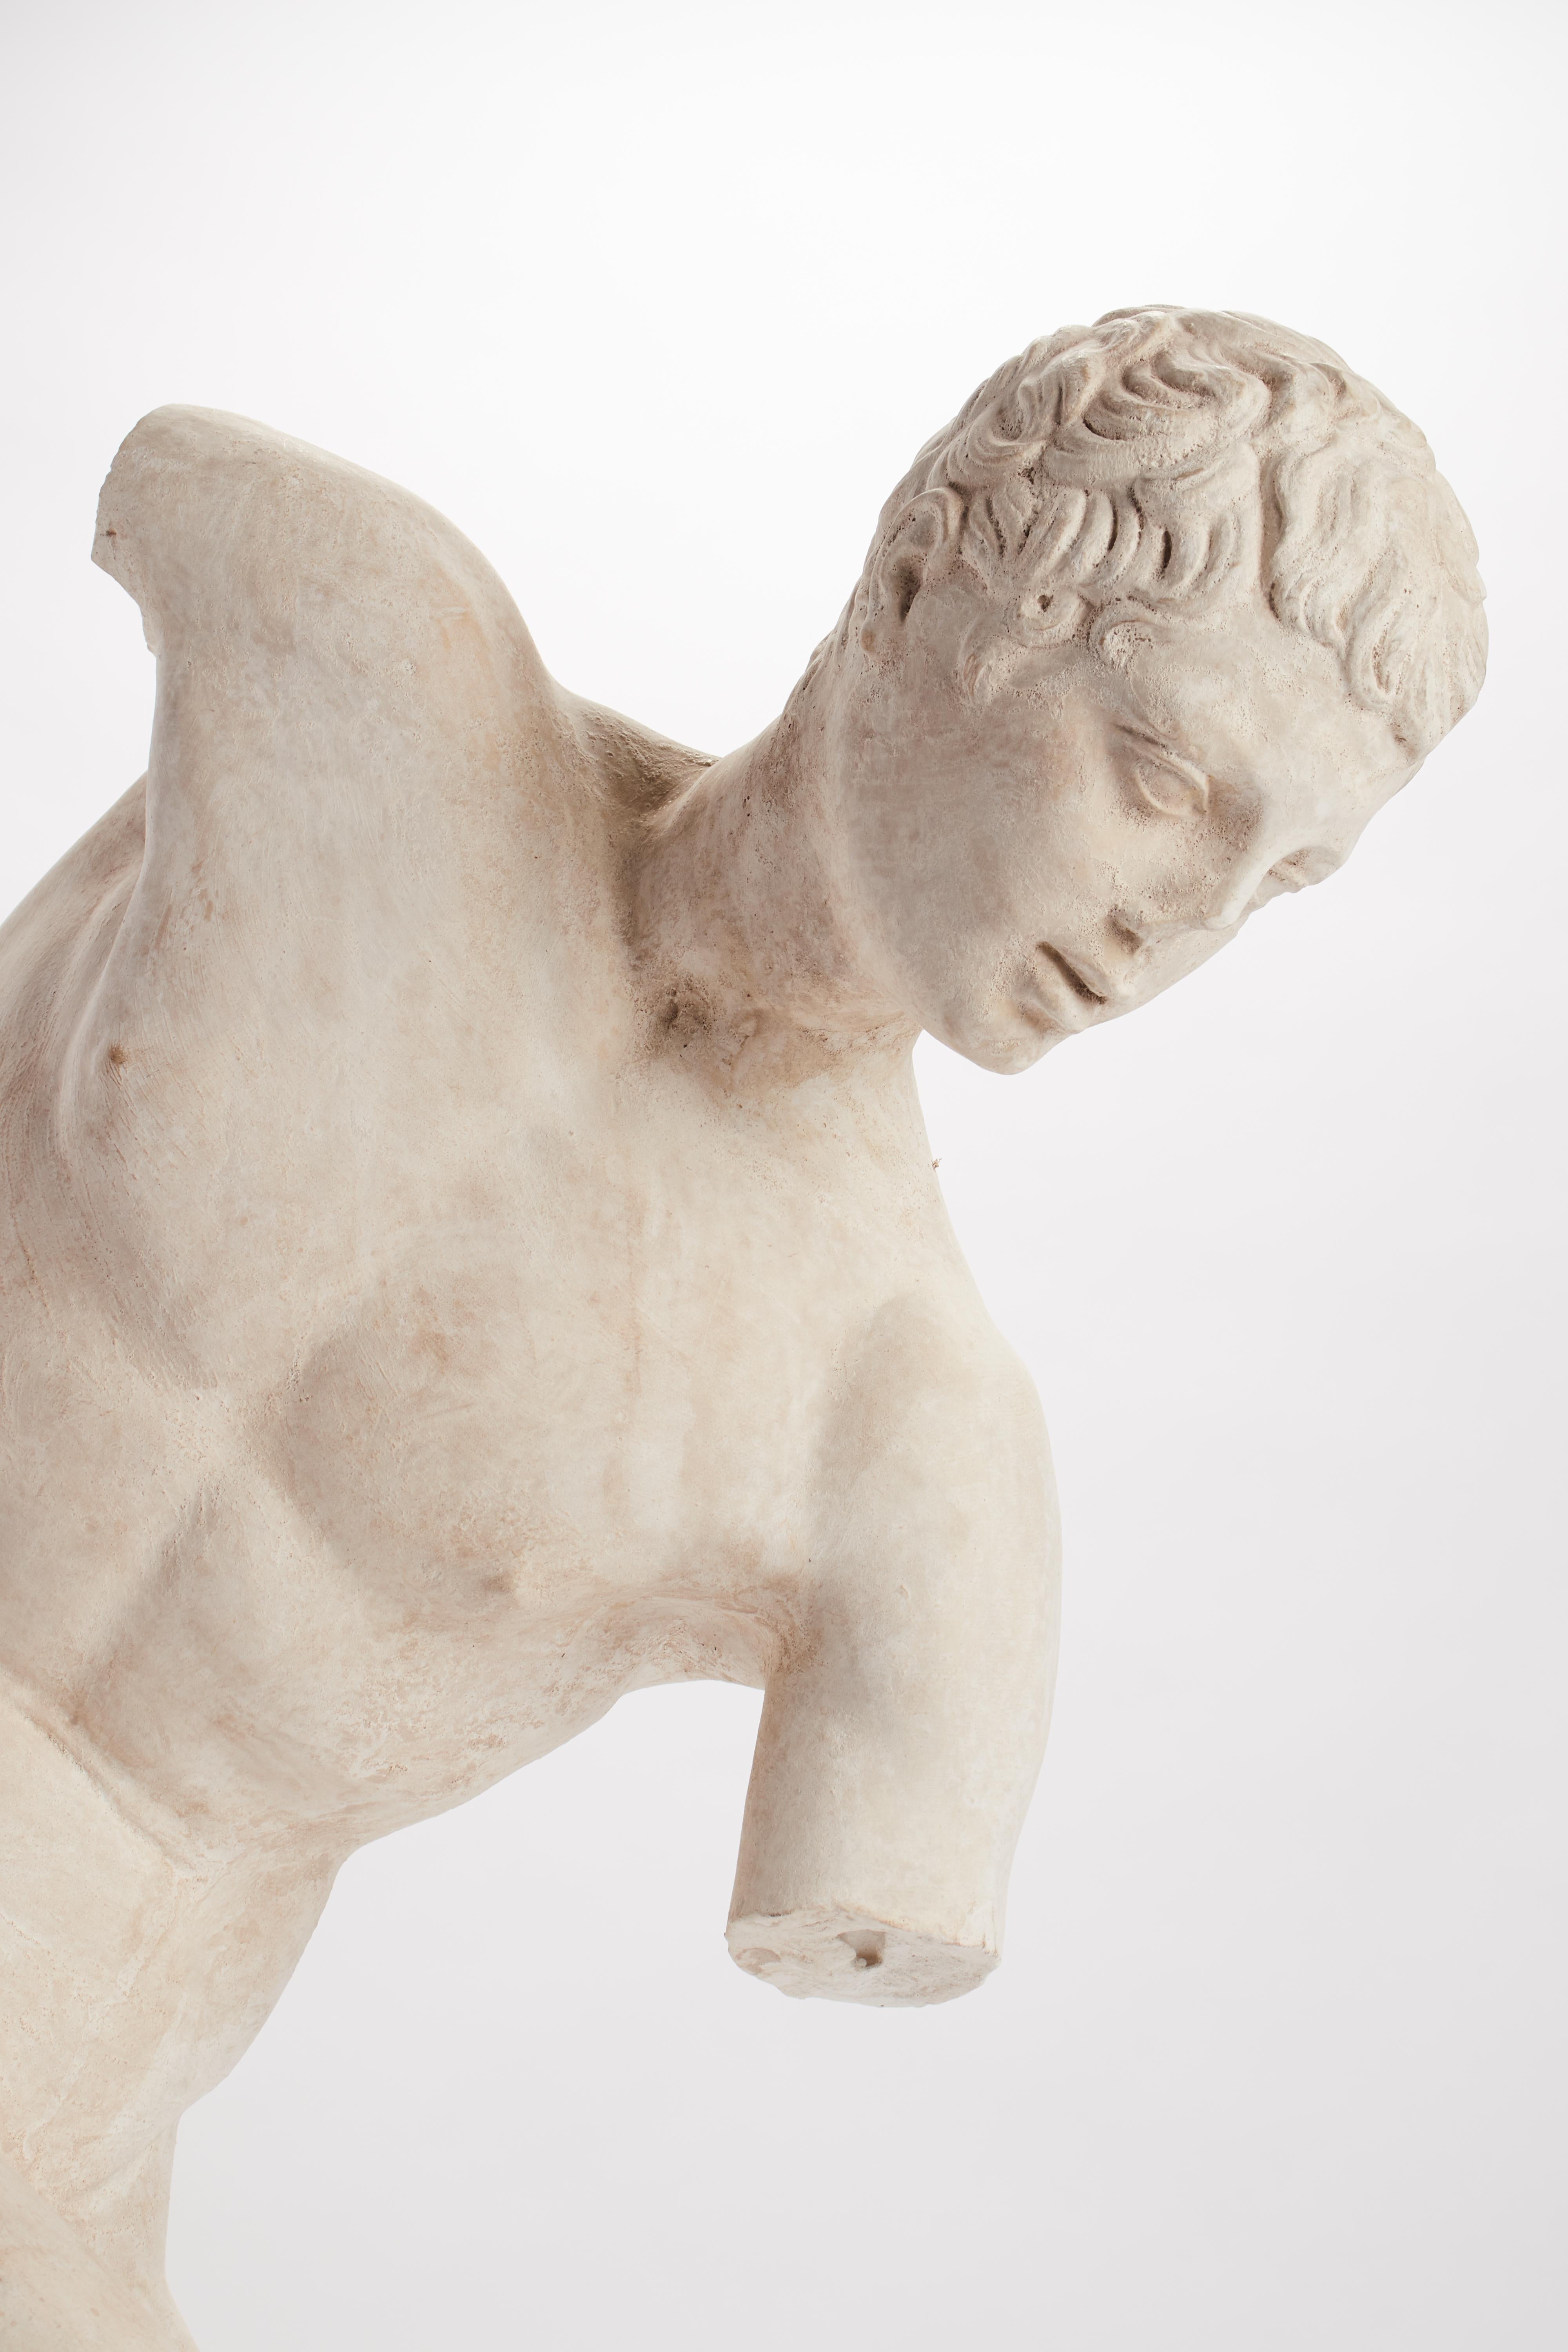 Late 19th Century Academic Cast Depicting a Discus Thrower, Italy, 1890